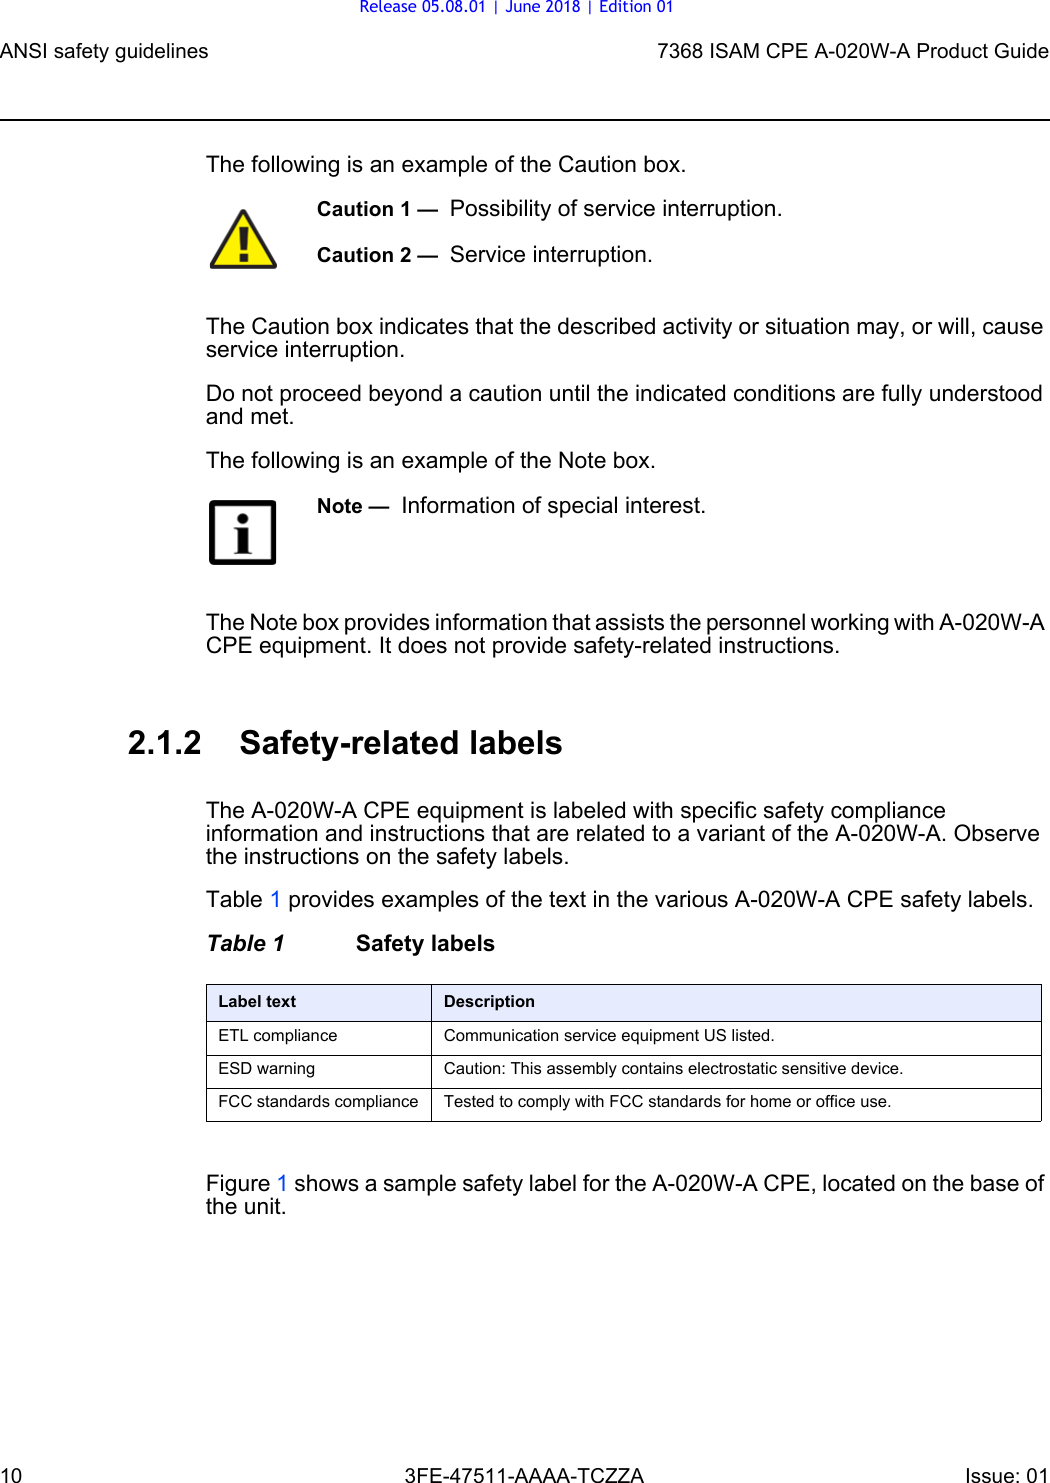 ANSI safety guidelines107368 ISAM CPE A-020W-A Product Guide3FE-47511-AAAA-TCZZA Issue: 01 The following is an example of the Caution box.The Caution box indicates that the described activity or situation may, or will, cause service interruption.Do not proceed beyond a caution until the indicated conditions are fully understood and met.The following is an example of the Note box.The Note box provides information that assists the personnel working with A-020W-A CPE equipment. It does not provide safety-related instructions.2.1.2 Safety-related labelsThe A-020W-A CPE equipment is labeled with specific safety compliance information and instructions that are related to a variant of the A-020W-A. Observe the instructions on the safety labels.Table 1 provides examples of the text in the various A-020W-A CPE safety labels.Table 1 Safety labelsFigure 1 shows a sample safety label for the A-020W-A CPE, located on the base of the unit.Caution 1 —  Possibility of service interruption.Caution 2 —  Service interruption.Note —  Information of special interest.Label text DescriptionETL compliance Communication service equipment US listed.ESD warning Caution: This assembly contains electrostatic sensitive device.FCC standards compliance Tested to comply with FCC standards for home or office use.Release 05.08.01 | June 2018 | Edition 01